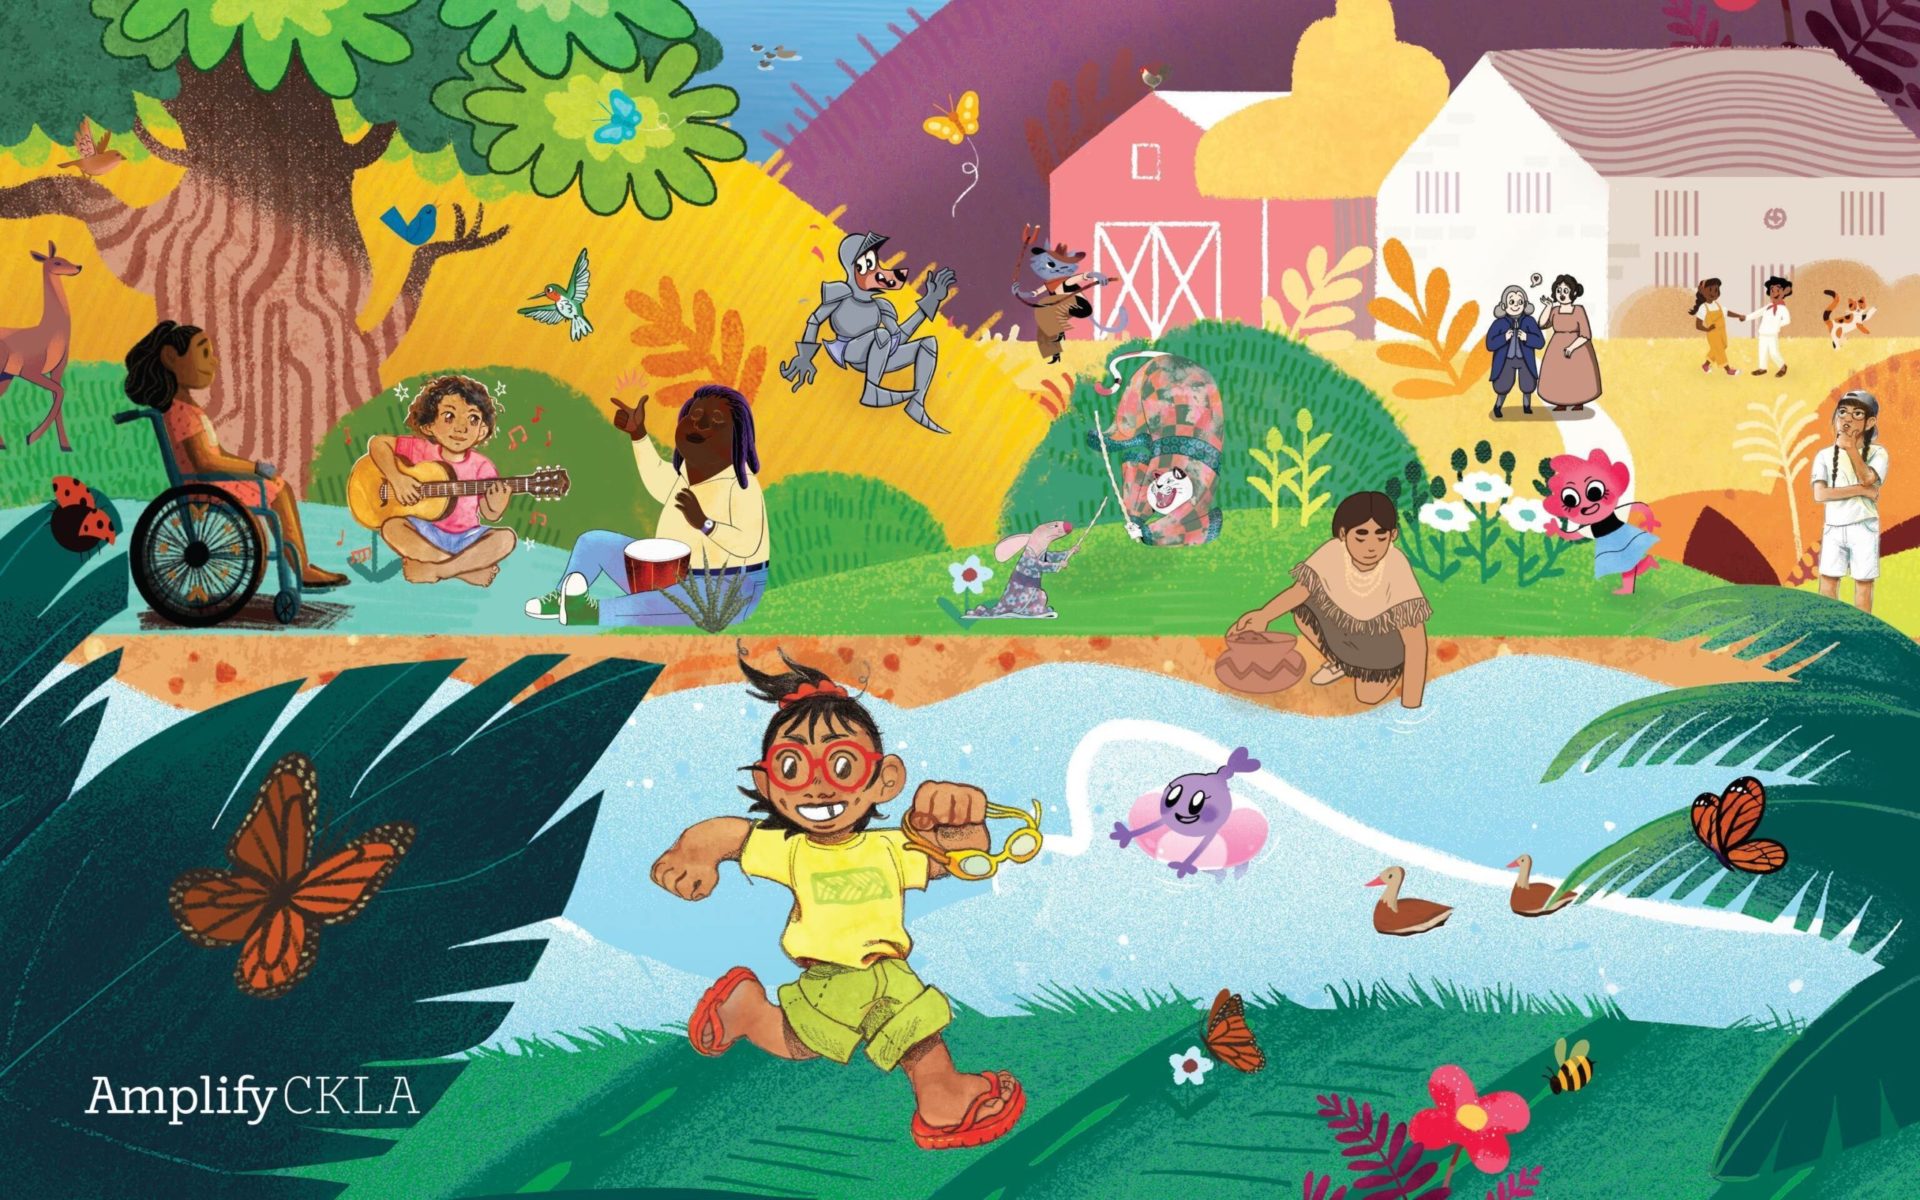 A vibrant illustration depicting diverse children and animals engaged in various activities in nature and by a pond.